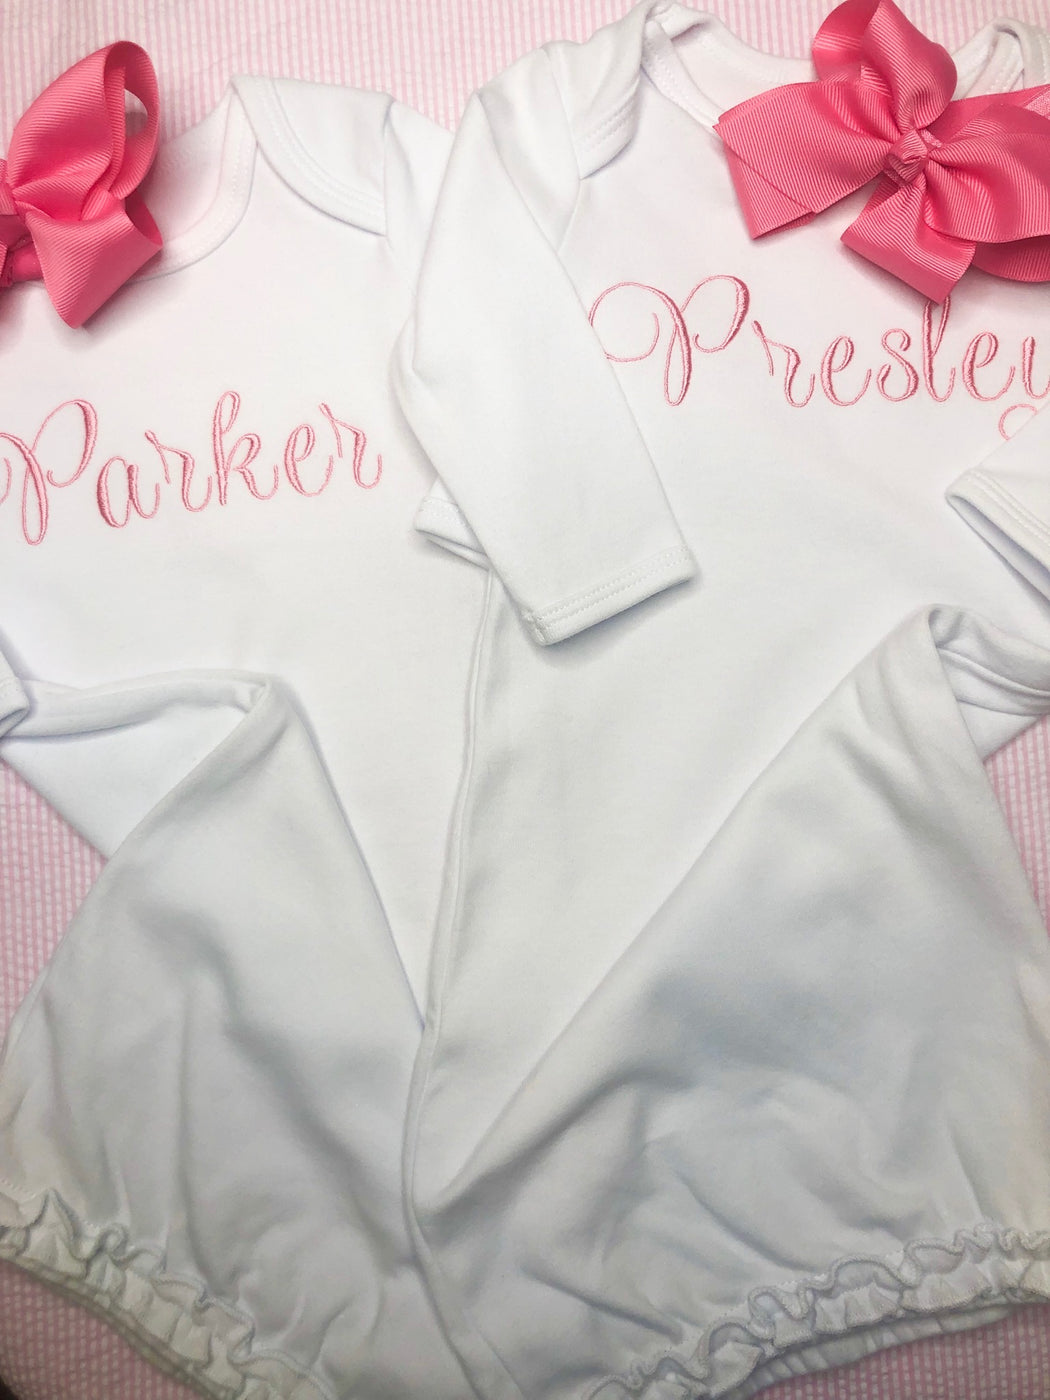 Baby Girl Welcome Home Outfit, White/Pink Monogrammed gown and bow